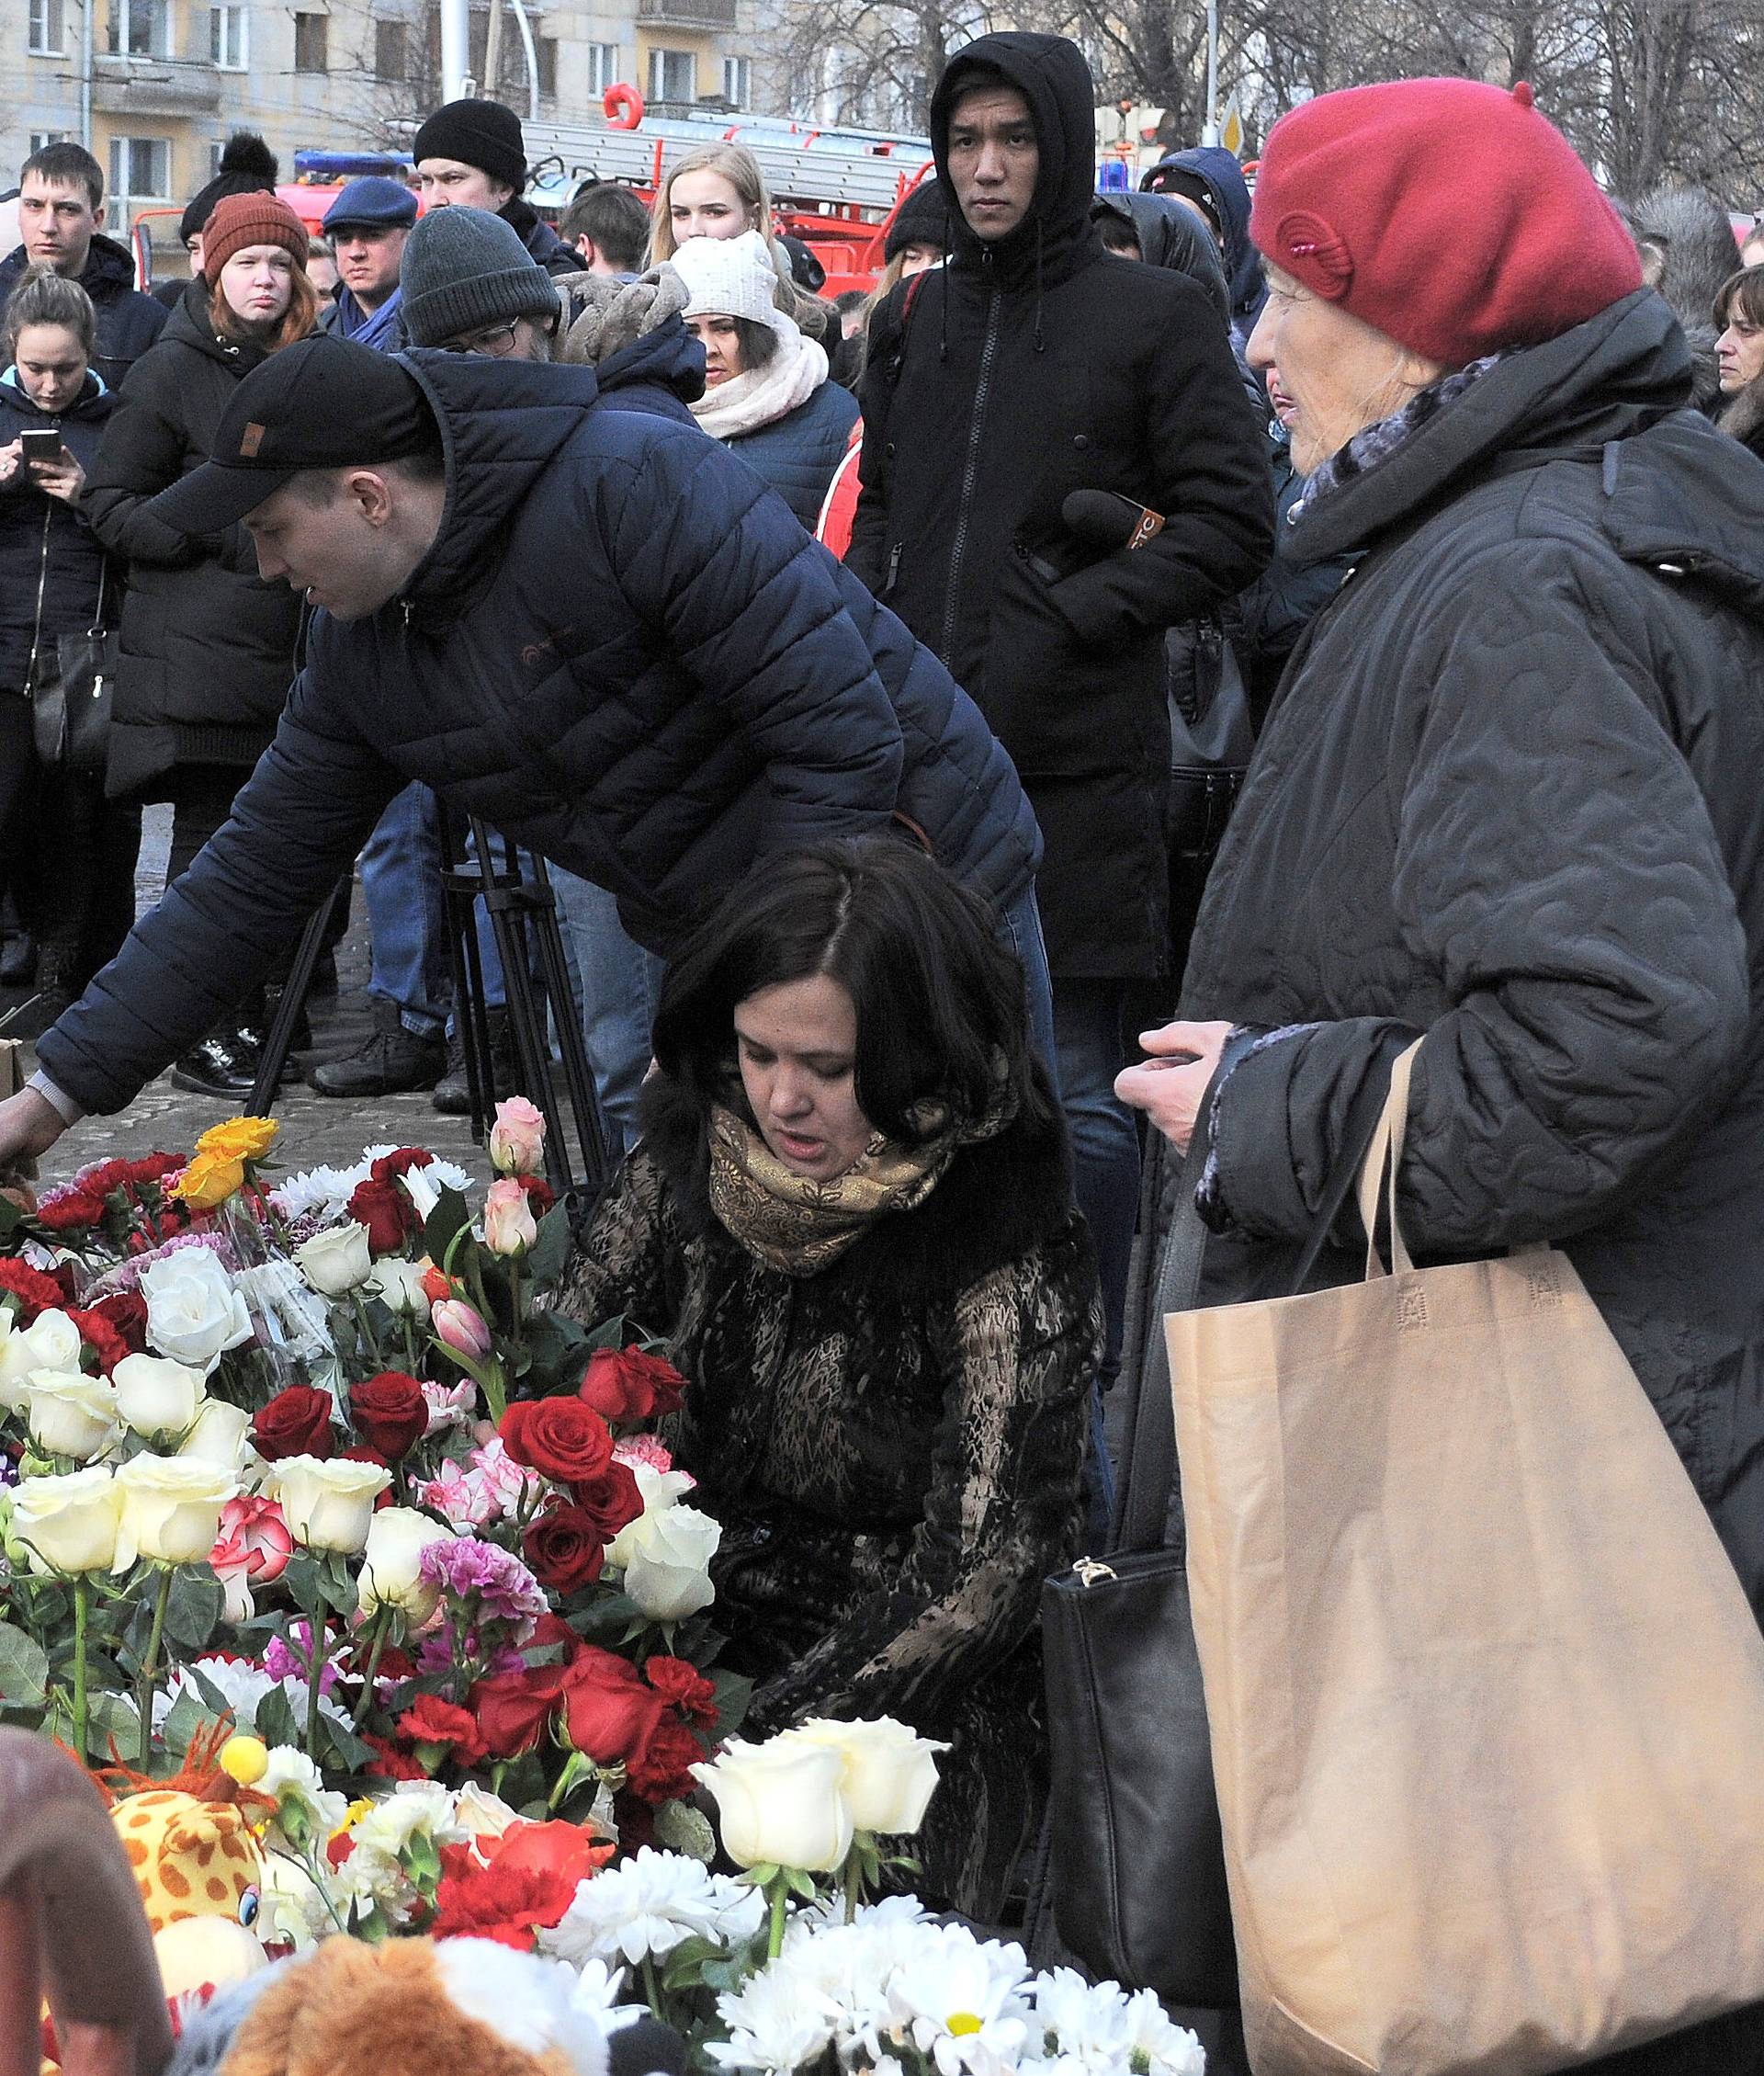 People place toys and flowers at a makeshift memorial for the victims of a shopping mall fire in Kemerovo